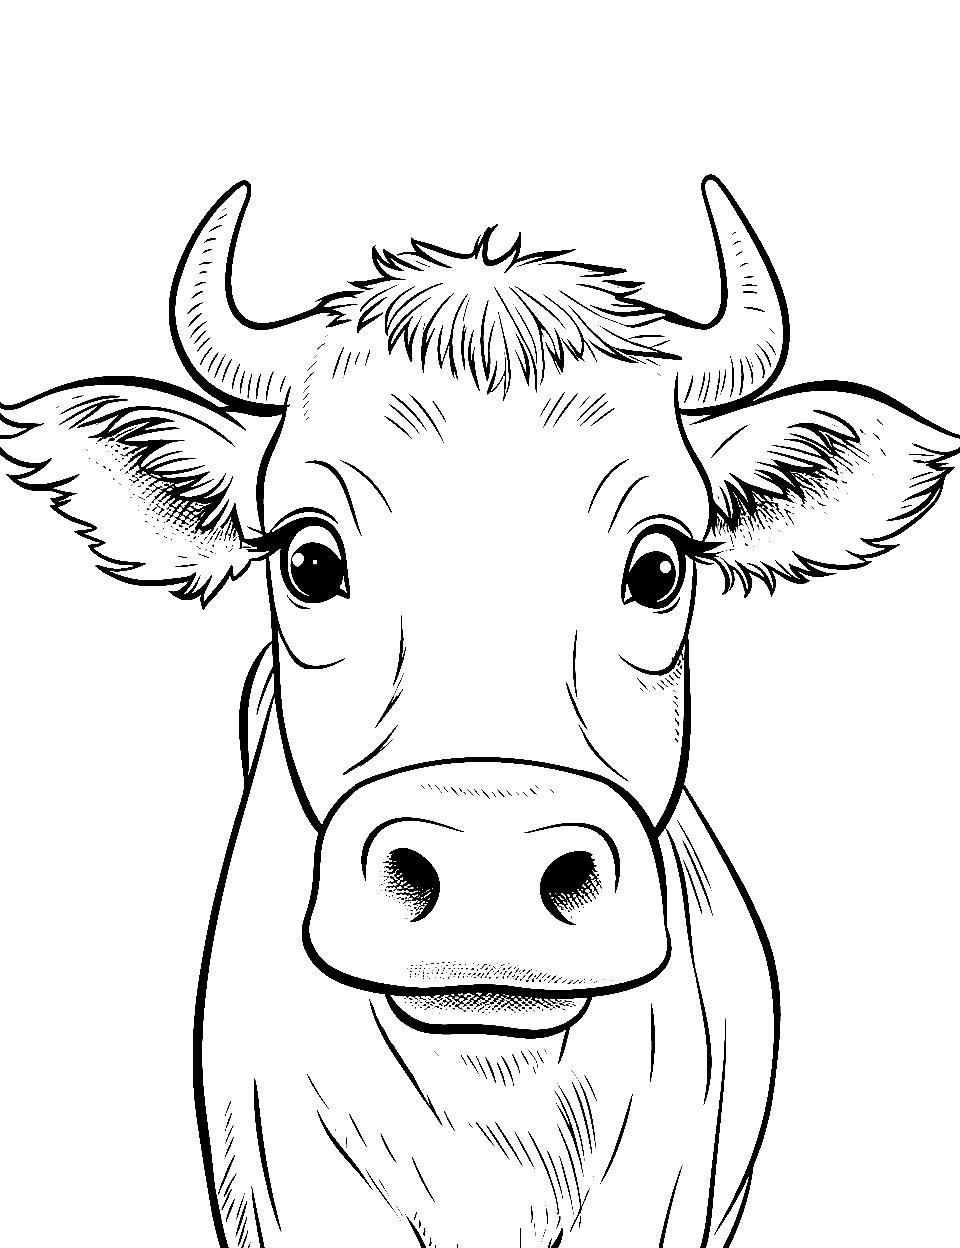 Curious Cow Head Coloring Page - A close-up of a curious cow’s face.